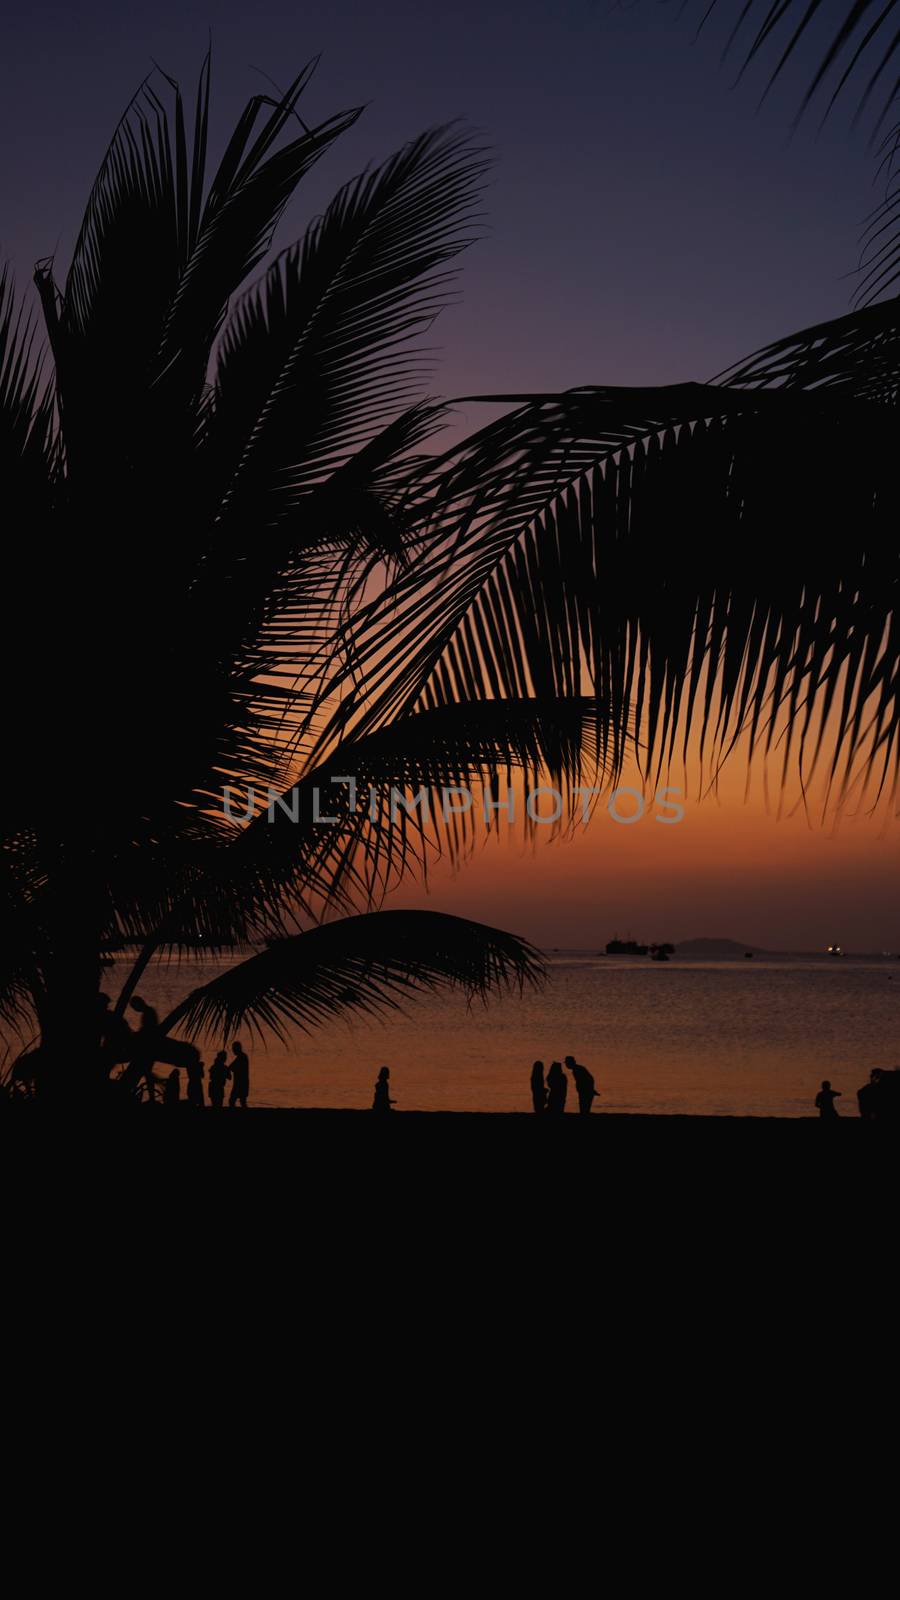 Silhouette of people on tropical beach at sunset - Tourists enjoying time by natali_brill